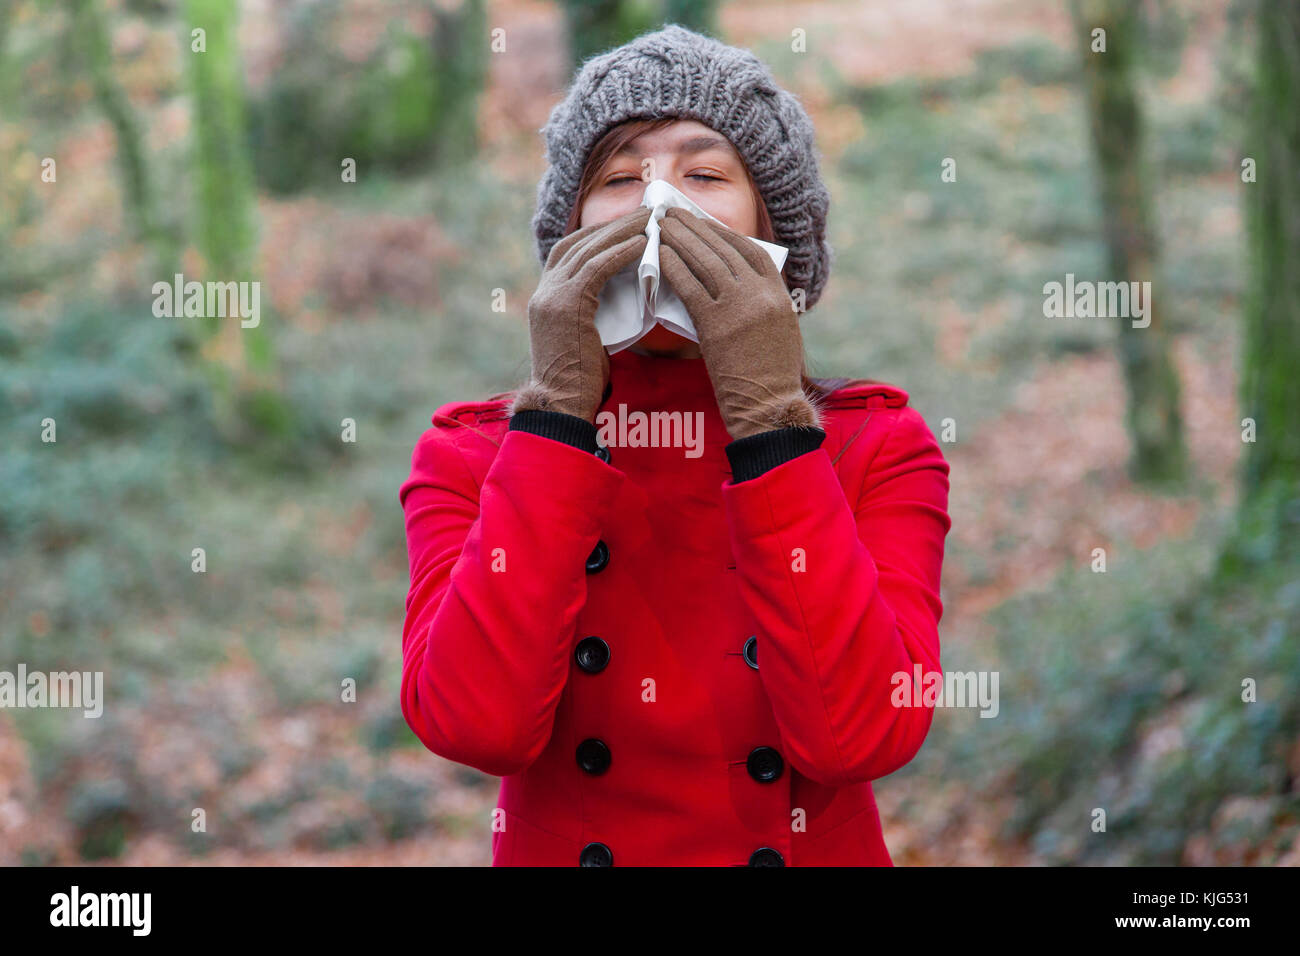 Young woman suffering from cold or flu blowing nose or sneezing on white paper handkerchief in forest wearing a red long coat or overcoat and beanie Stock Photo